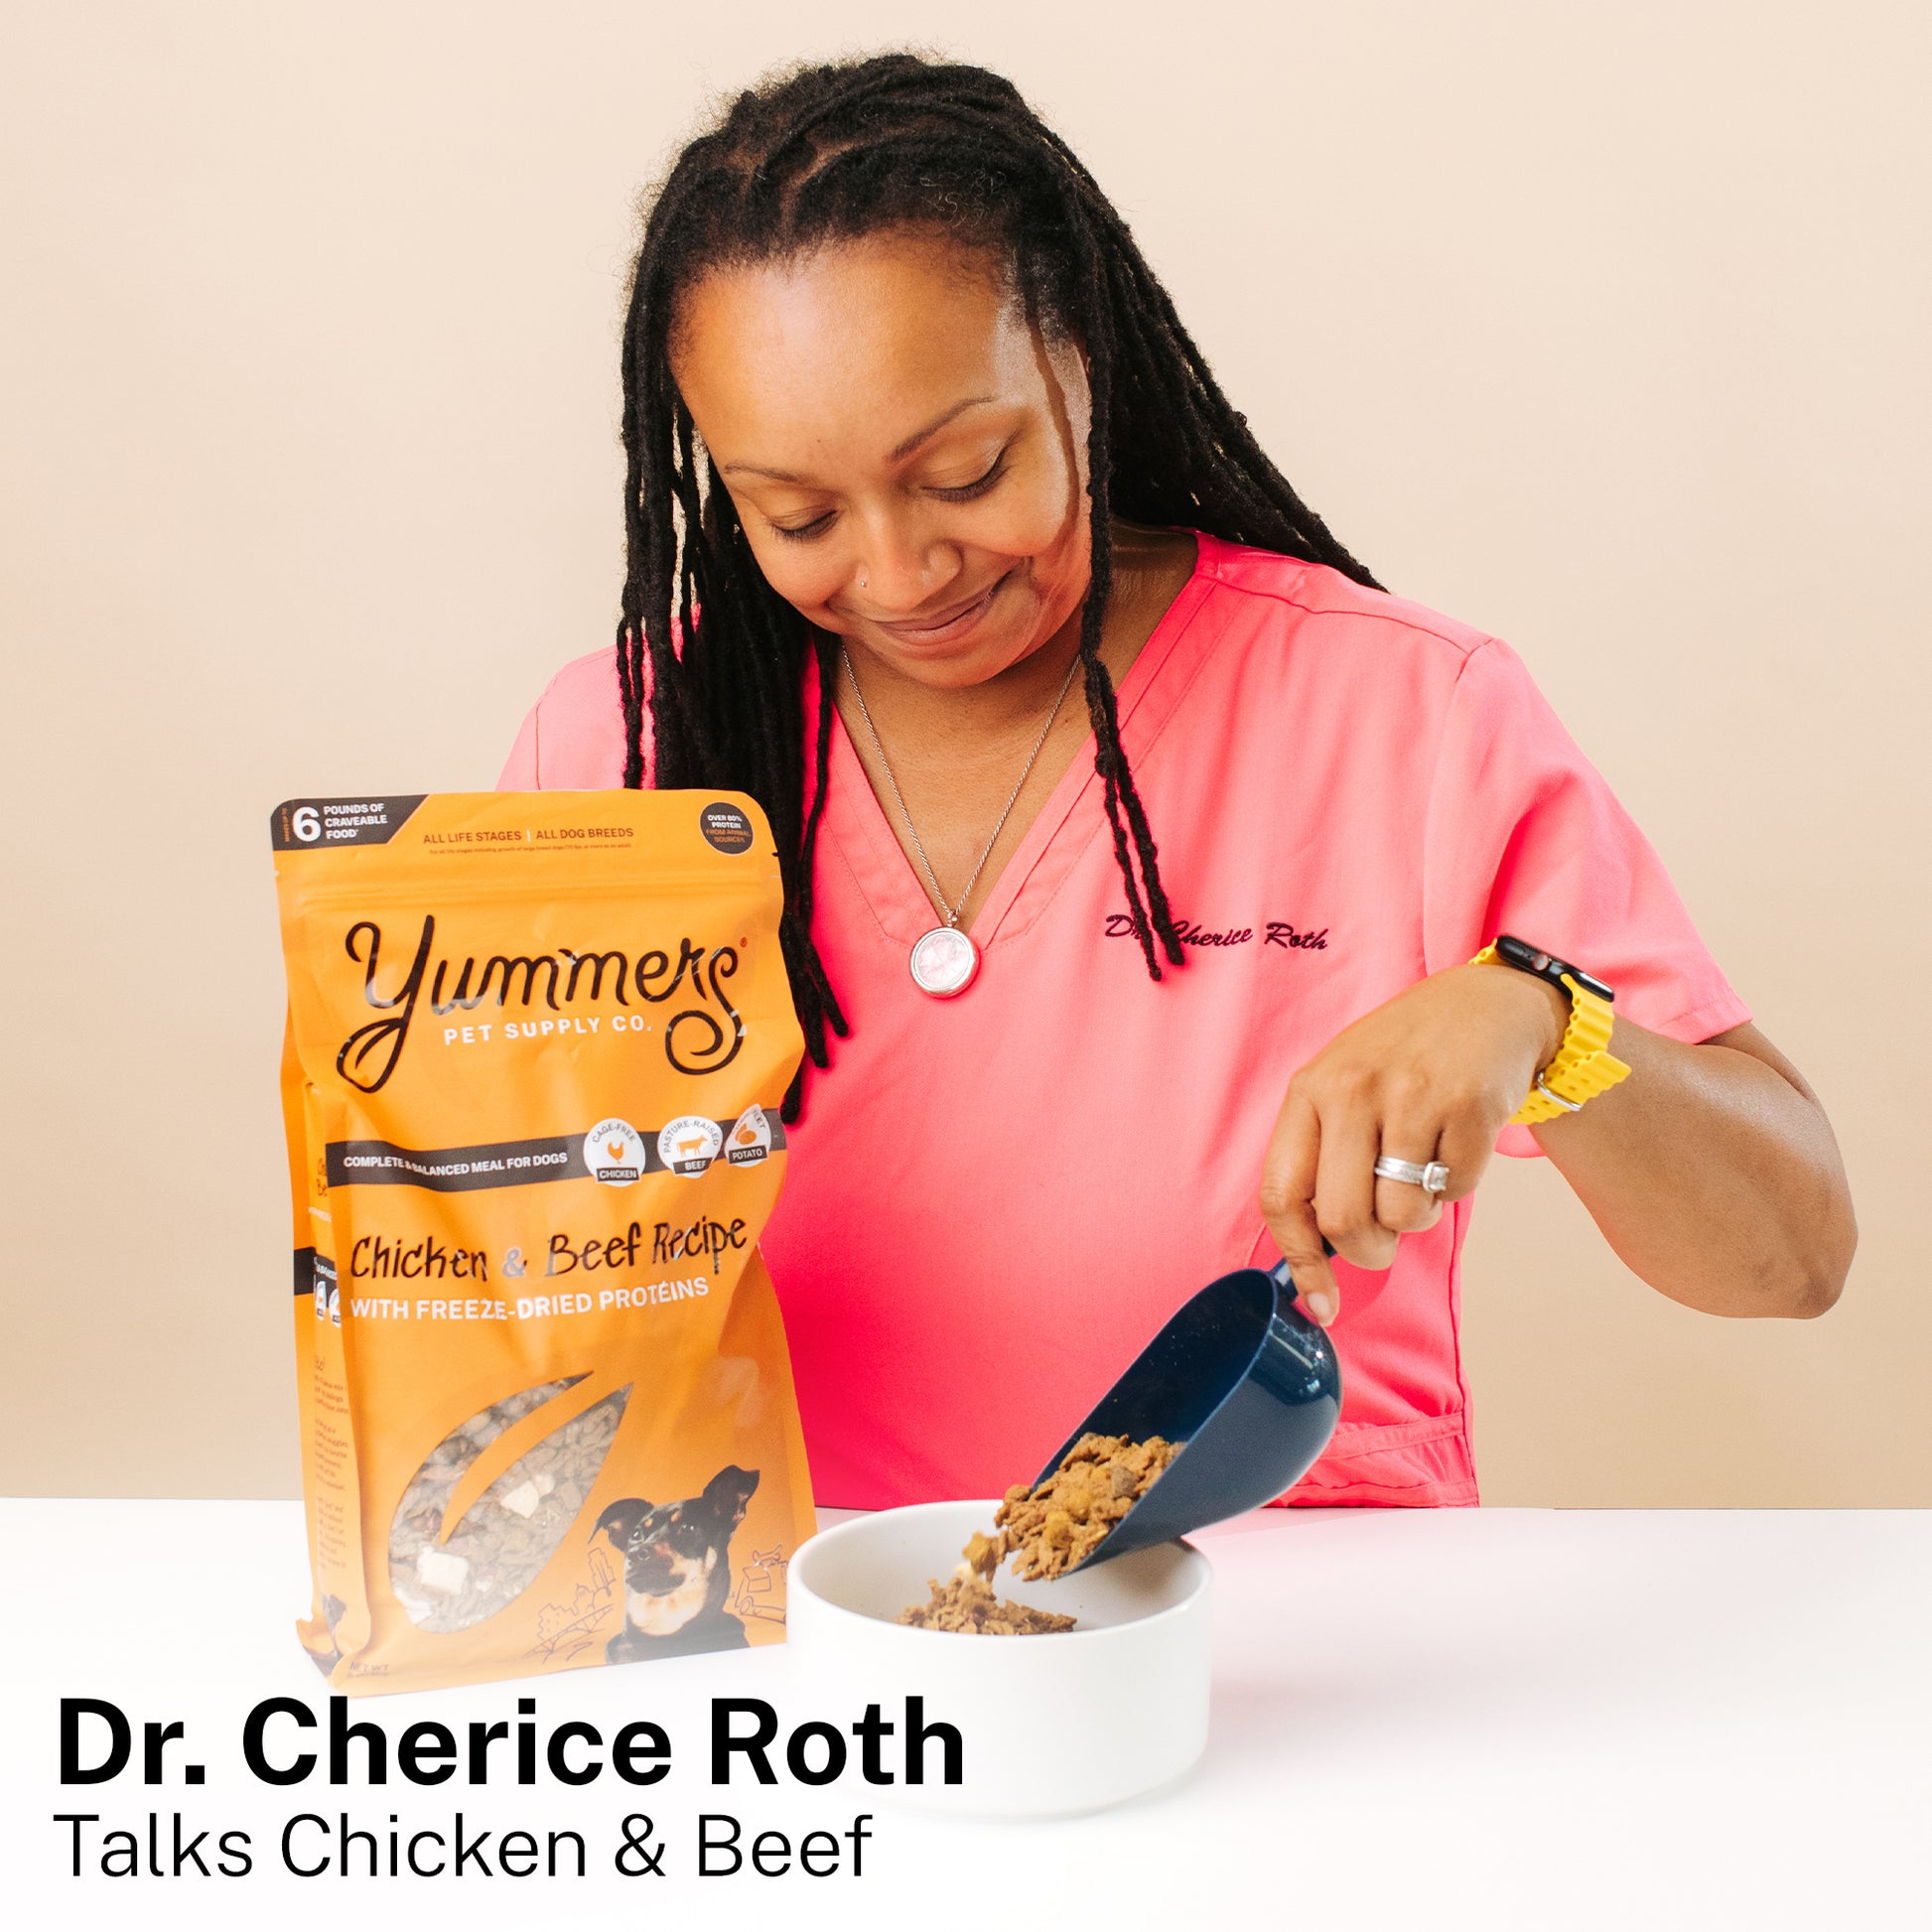 Dr. Cherice Roth's review of Yummers Chicken & Beef Dog Food